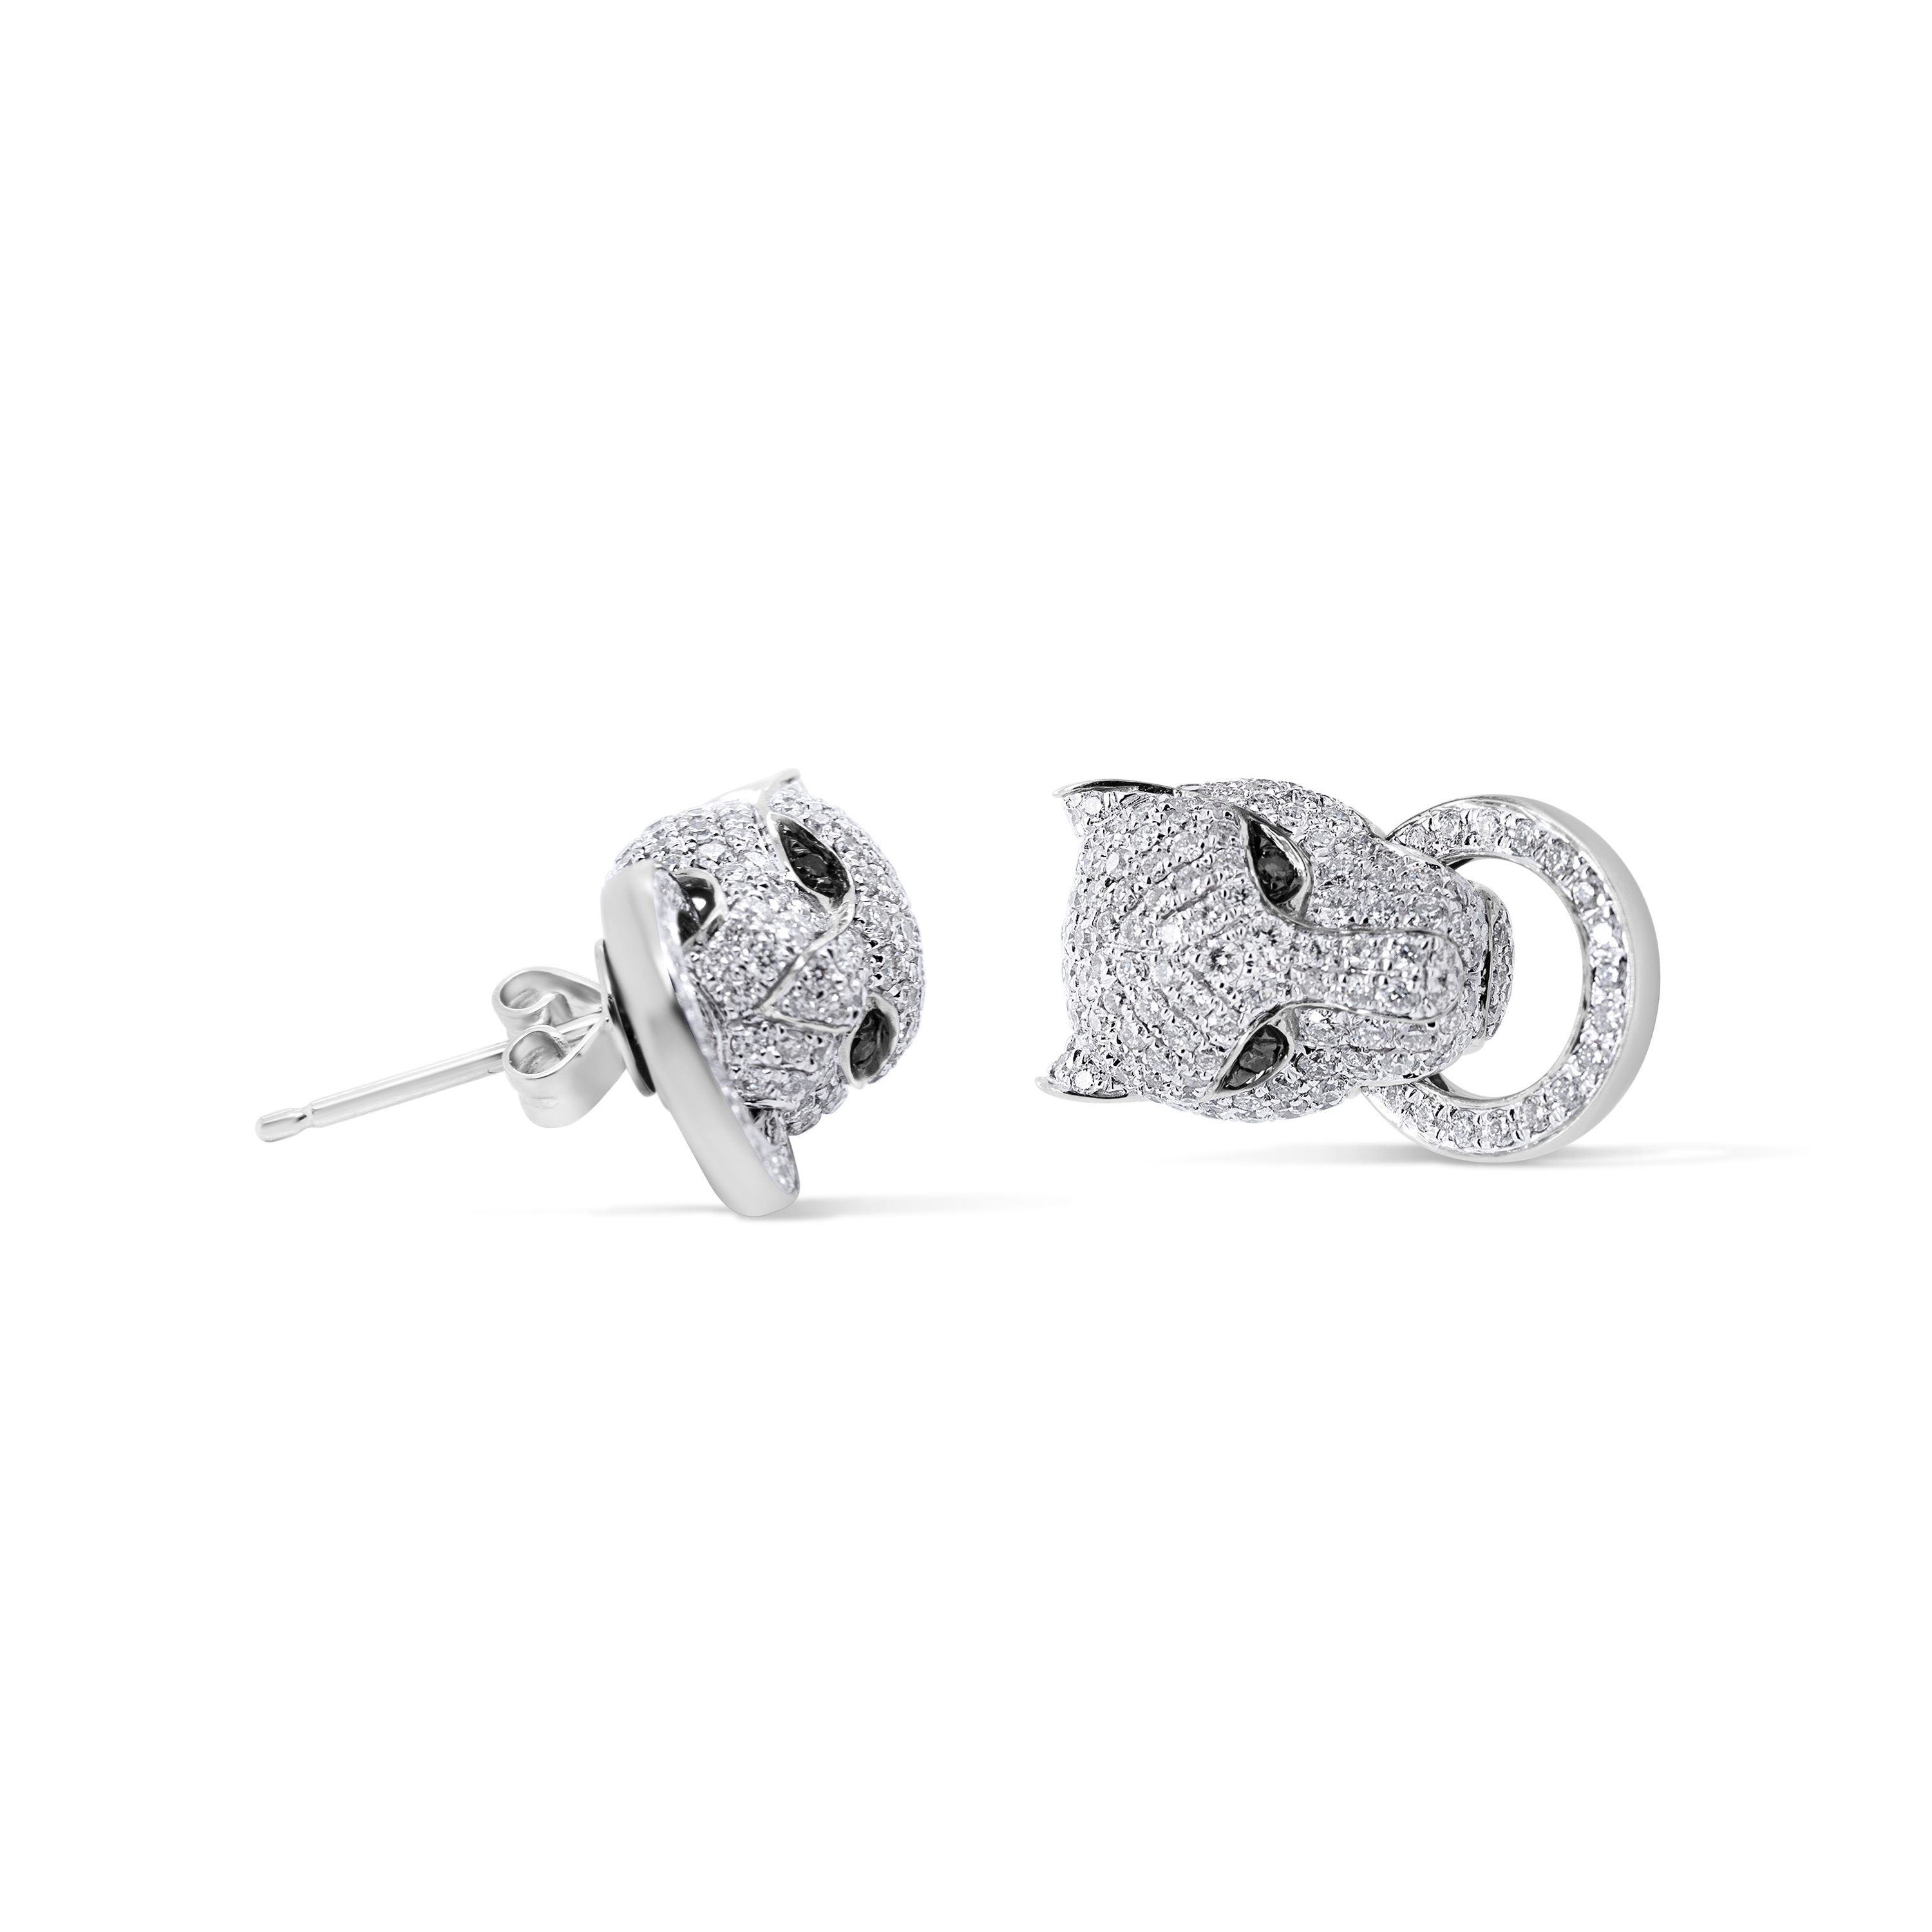 Diamond Panther Earrings 1.55 ct. 14K White Gold